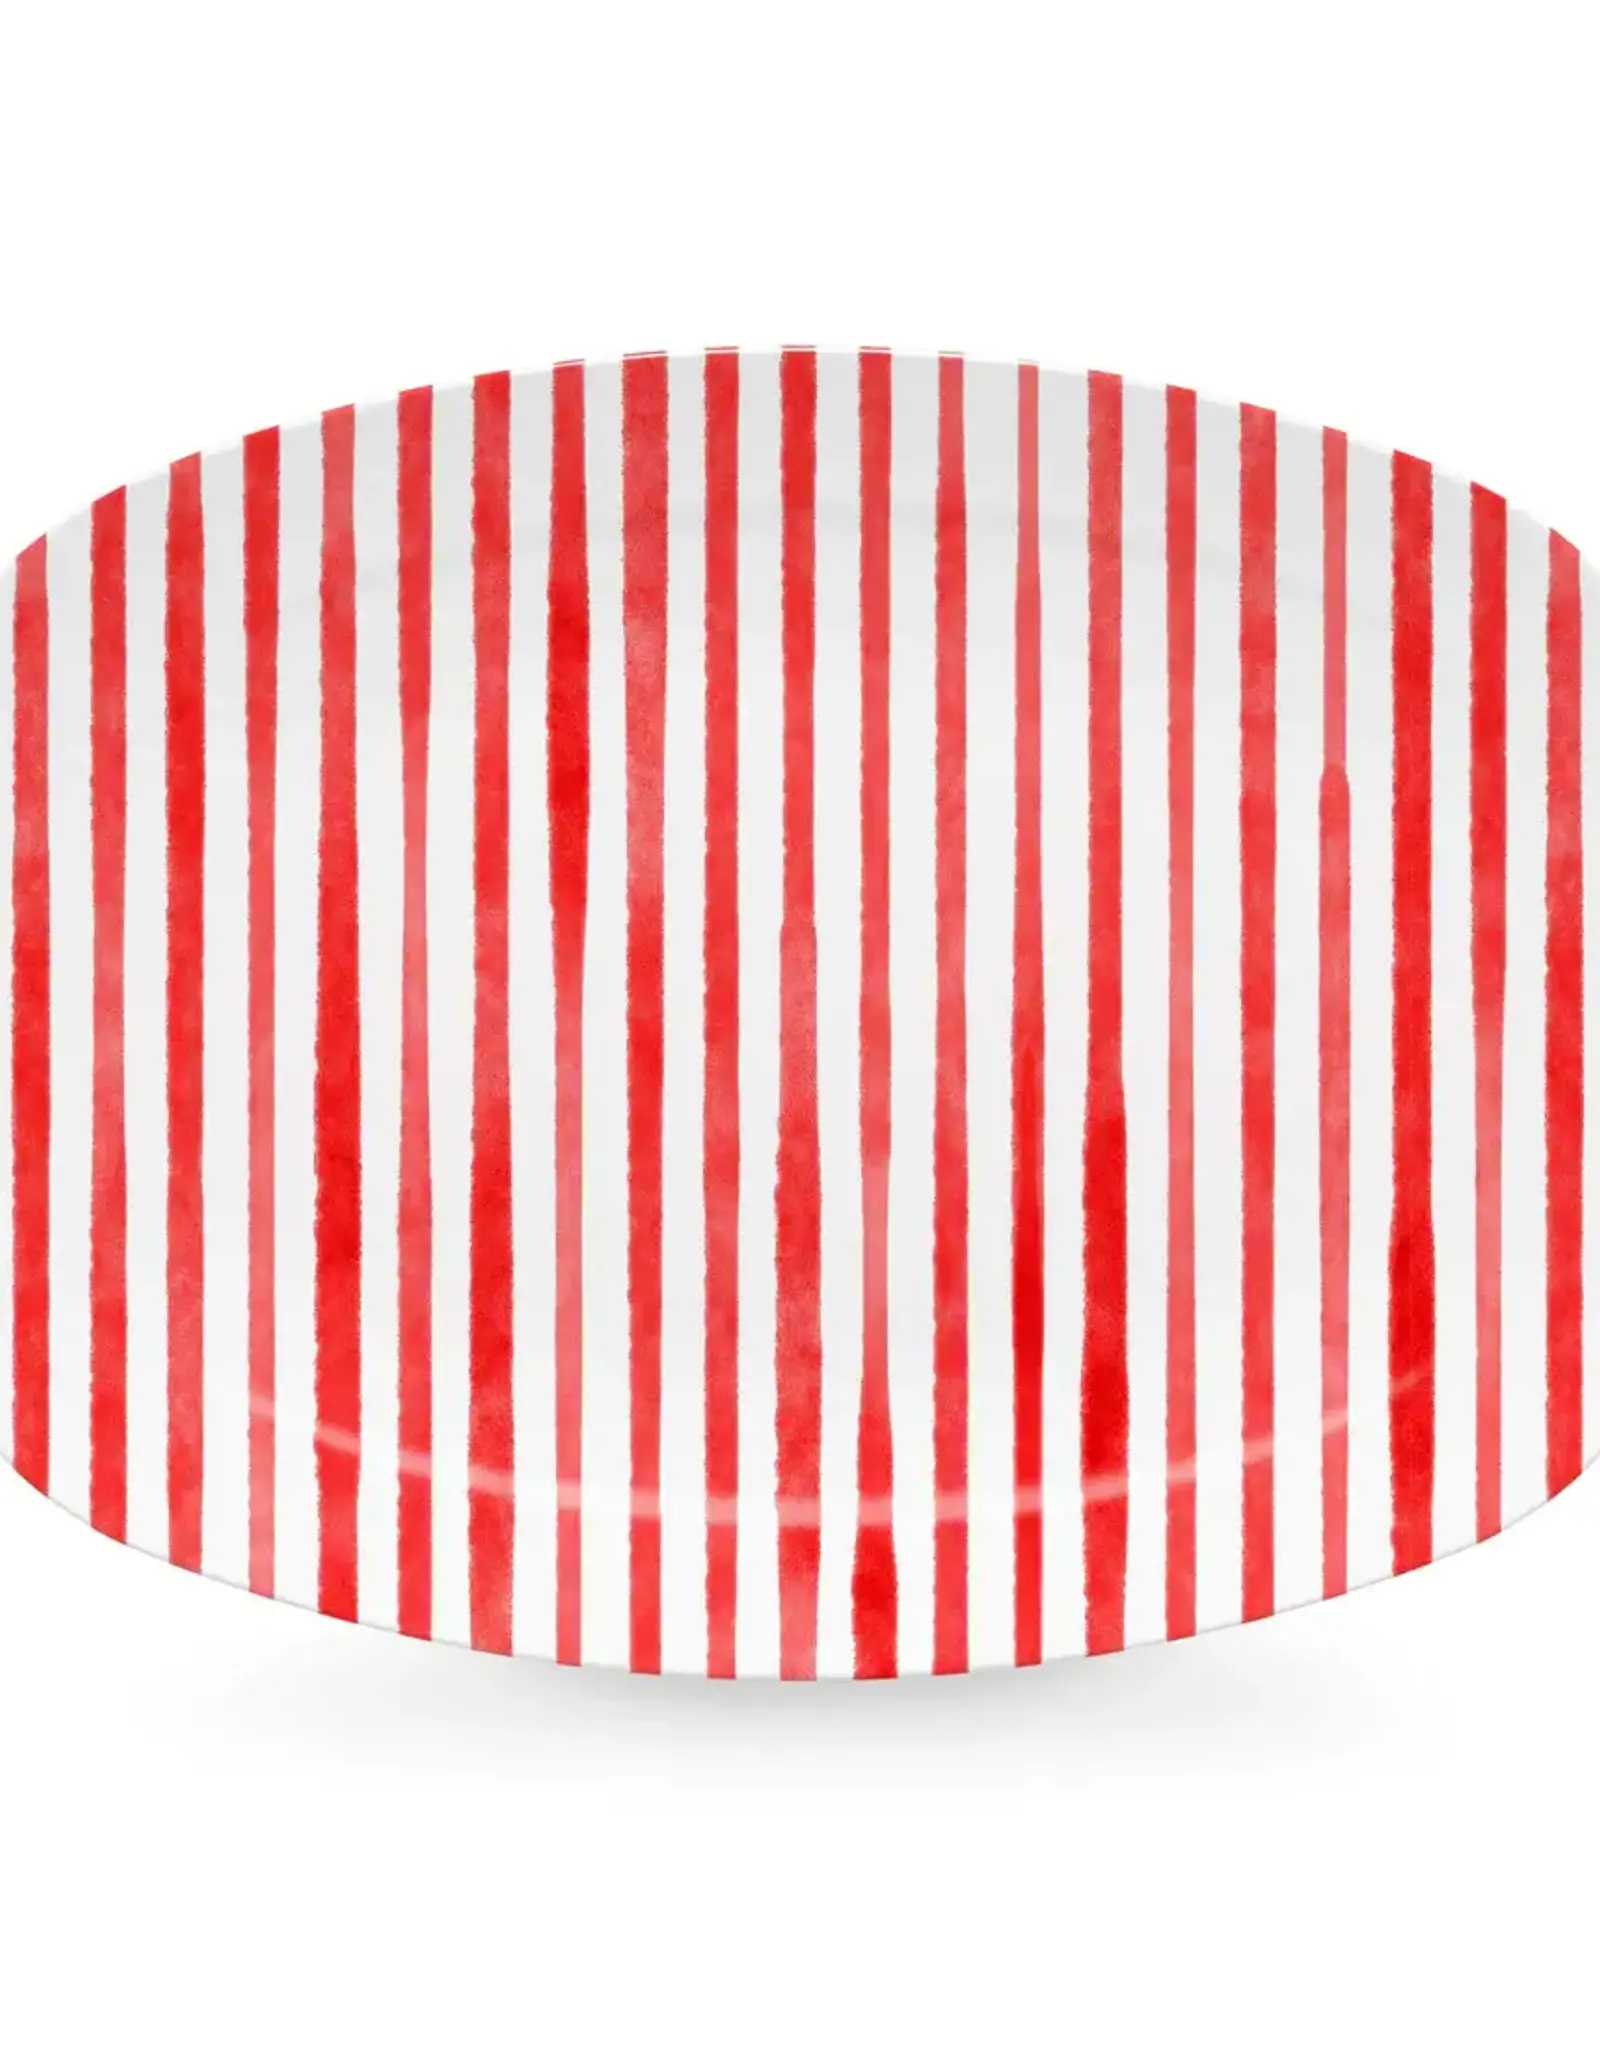 Mariposa Red Simple Stripes Platter